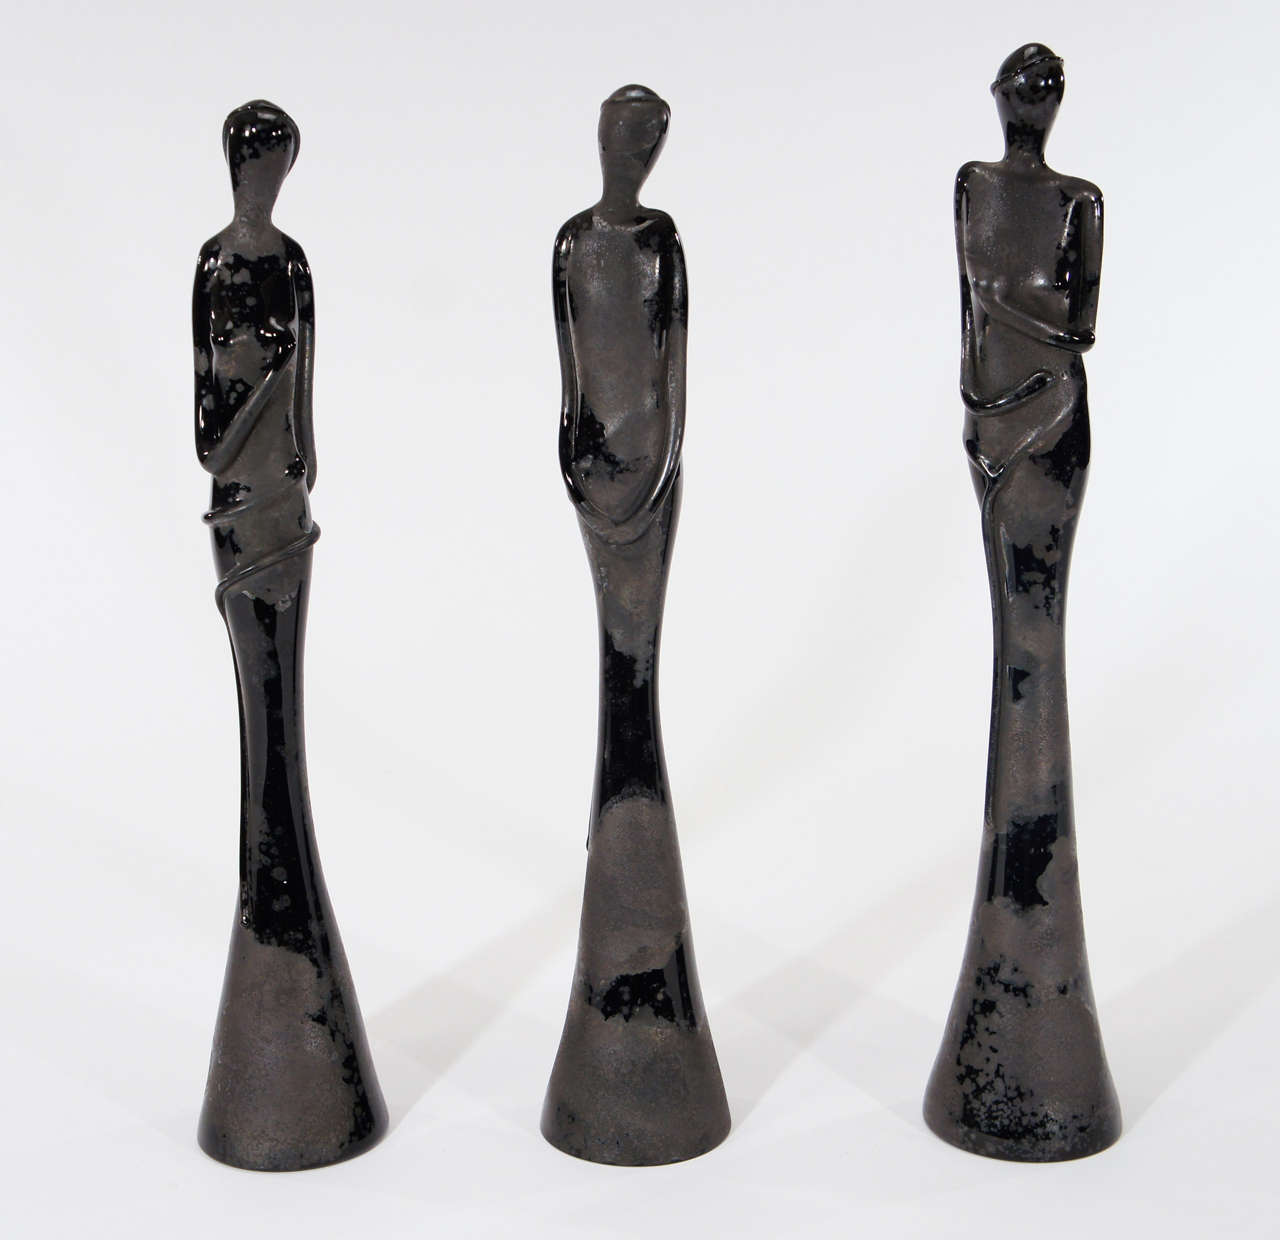 These three black glass female nude sculptures were made by Barovier and de-accessioned from the Jones Museum, still retaining the original labels. The glass technique, called 